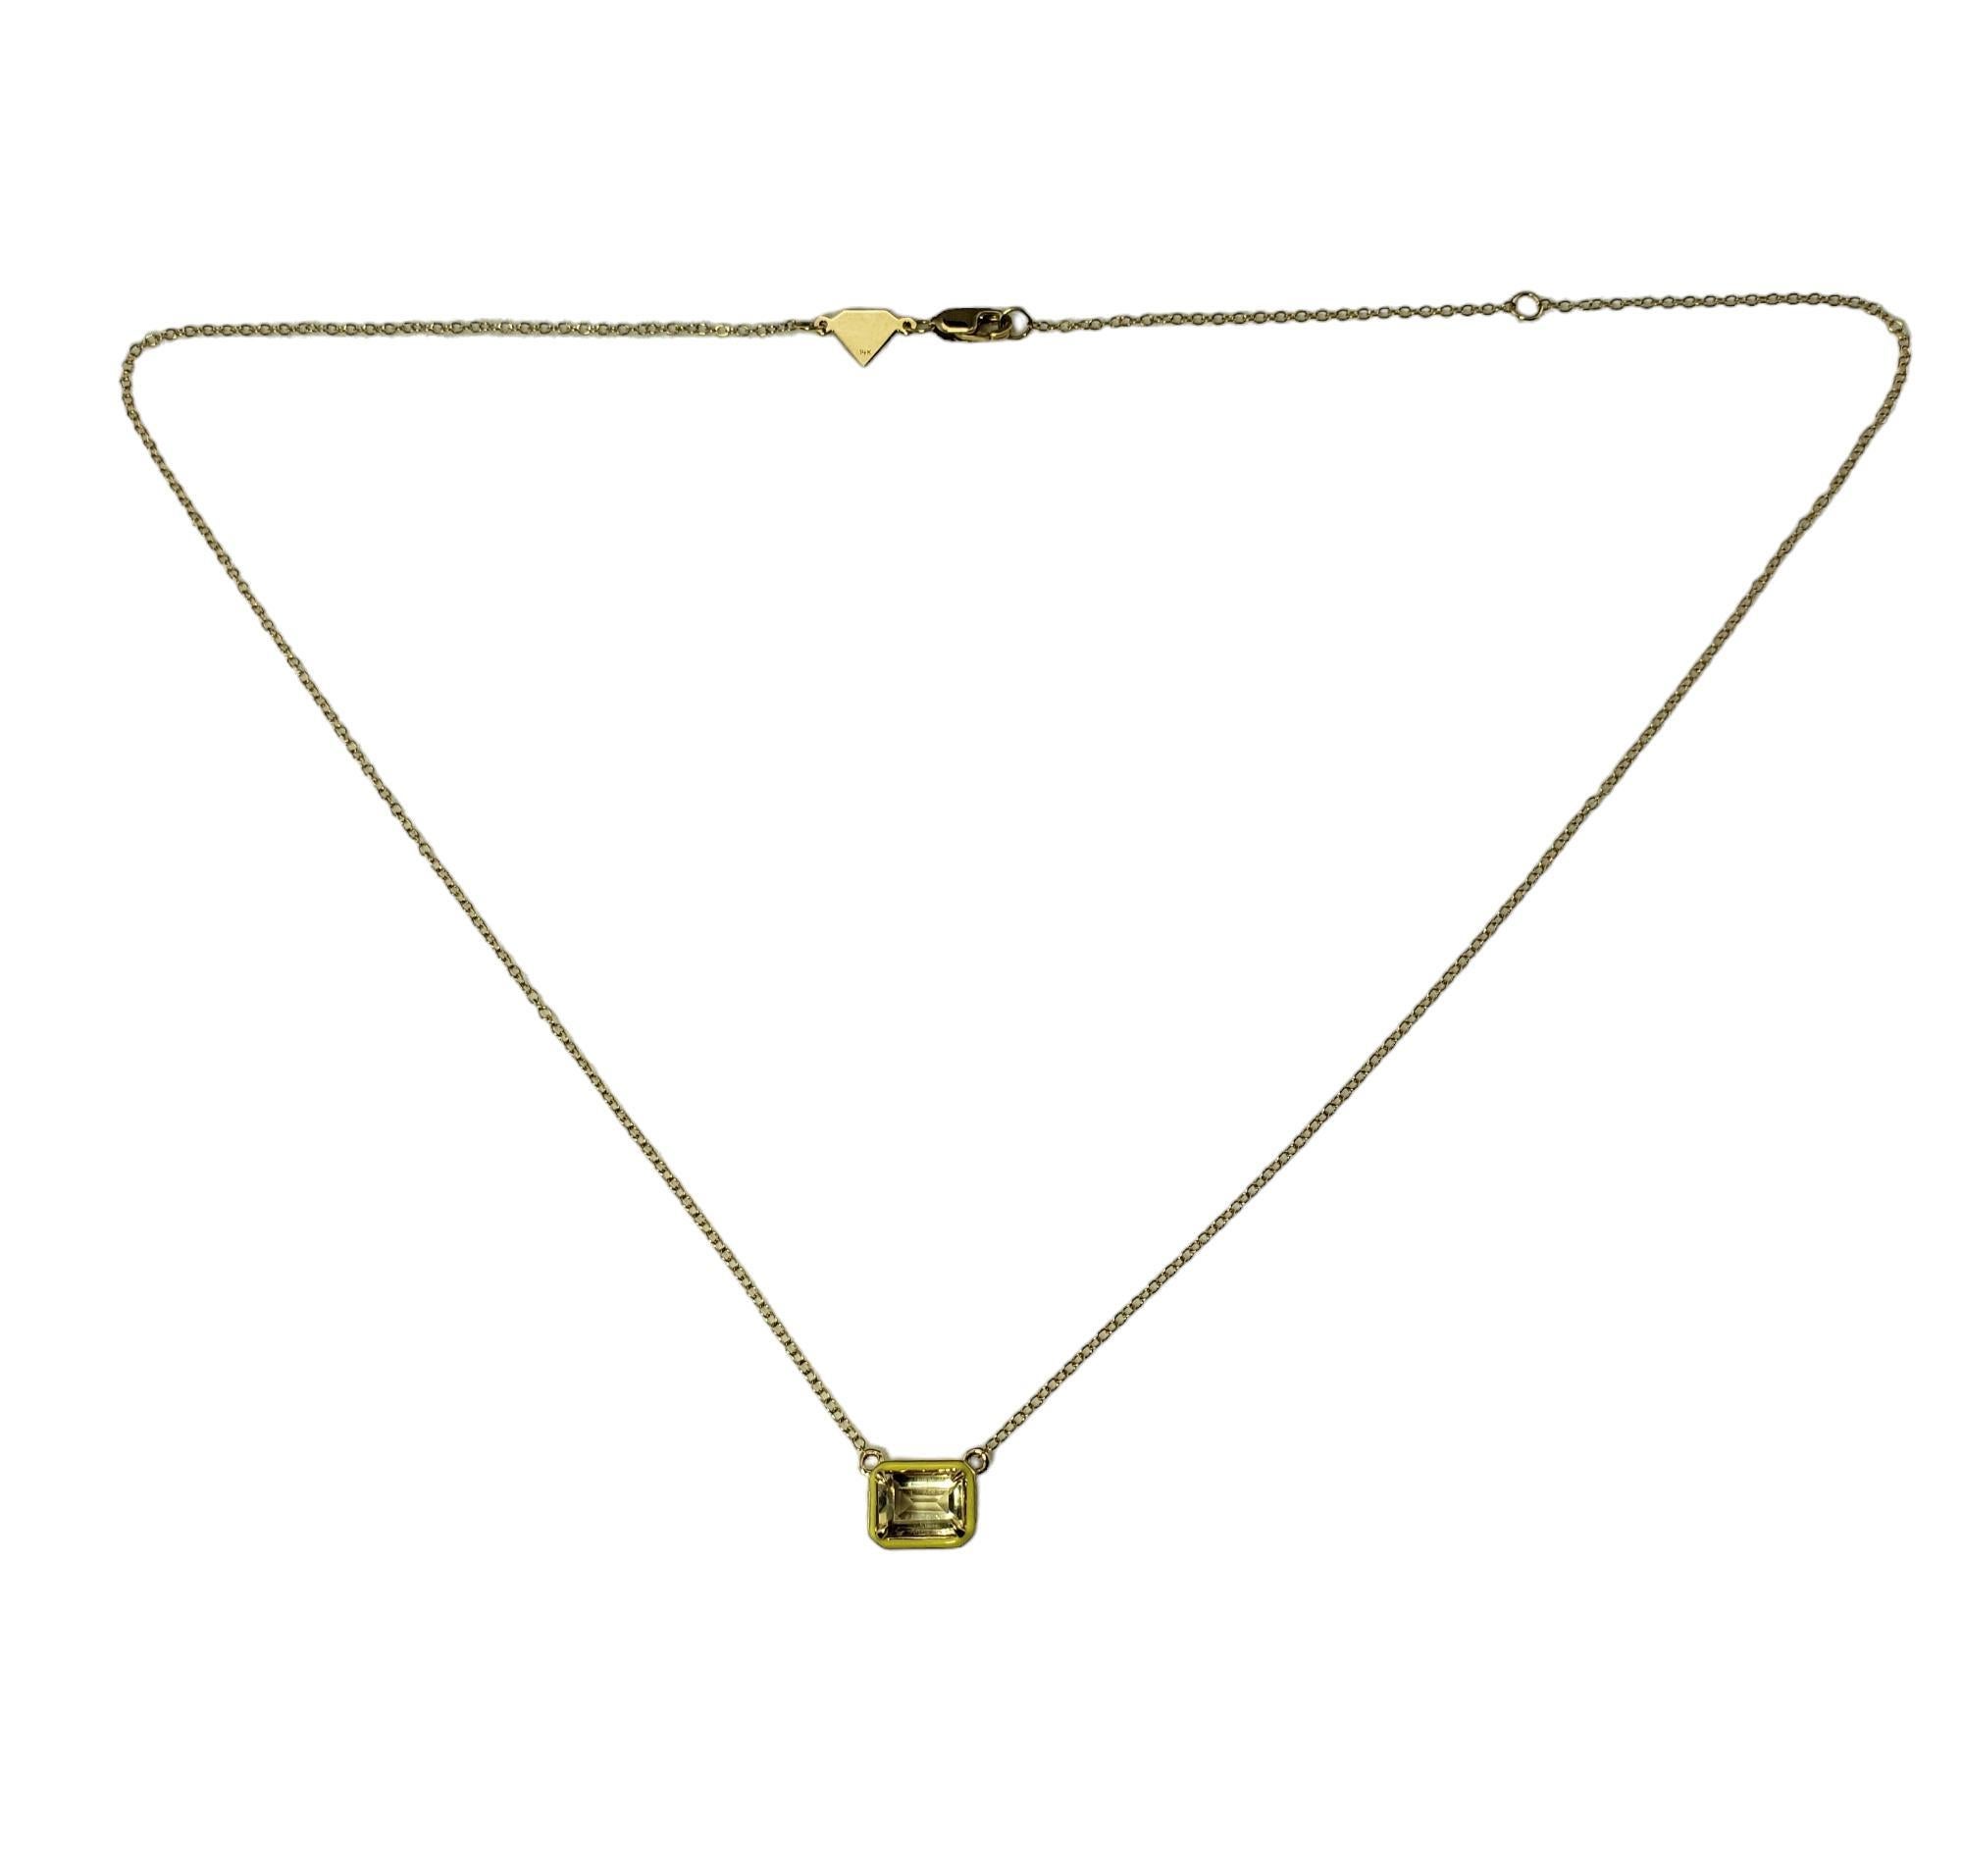 Vintage Alison Lou 14K Yellow Gold Lab Created Citrine and Enamel Necklace-

This elegant pendant by Alison Lou features one rectangular lab-created citrine accented with yellow enamel and set on a delicate 14K yellow gold necklace.

Citrine weight: